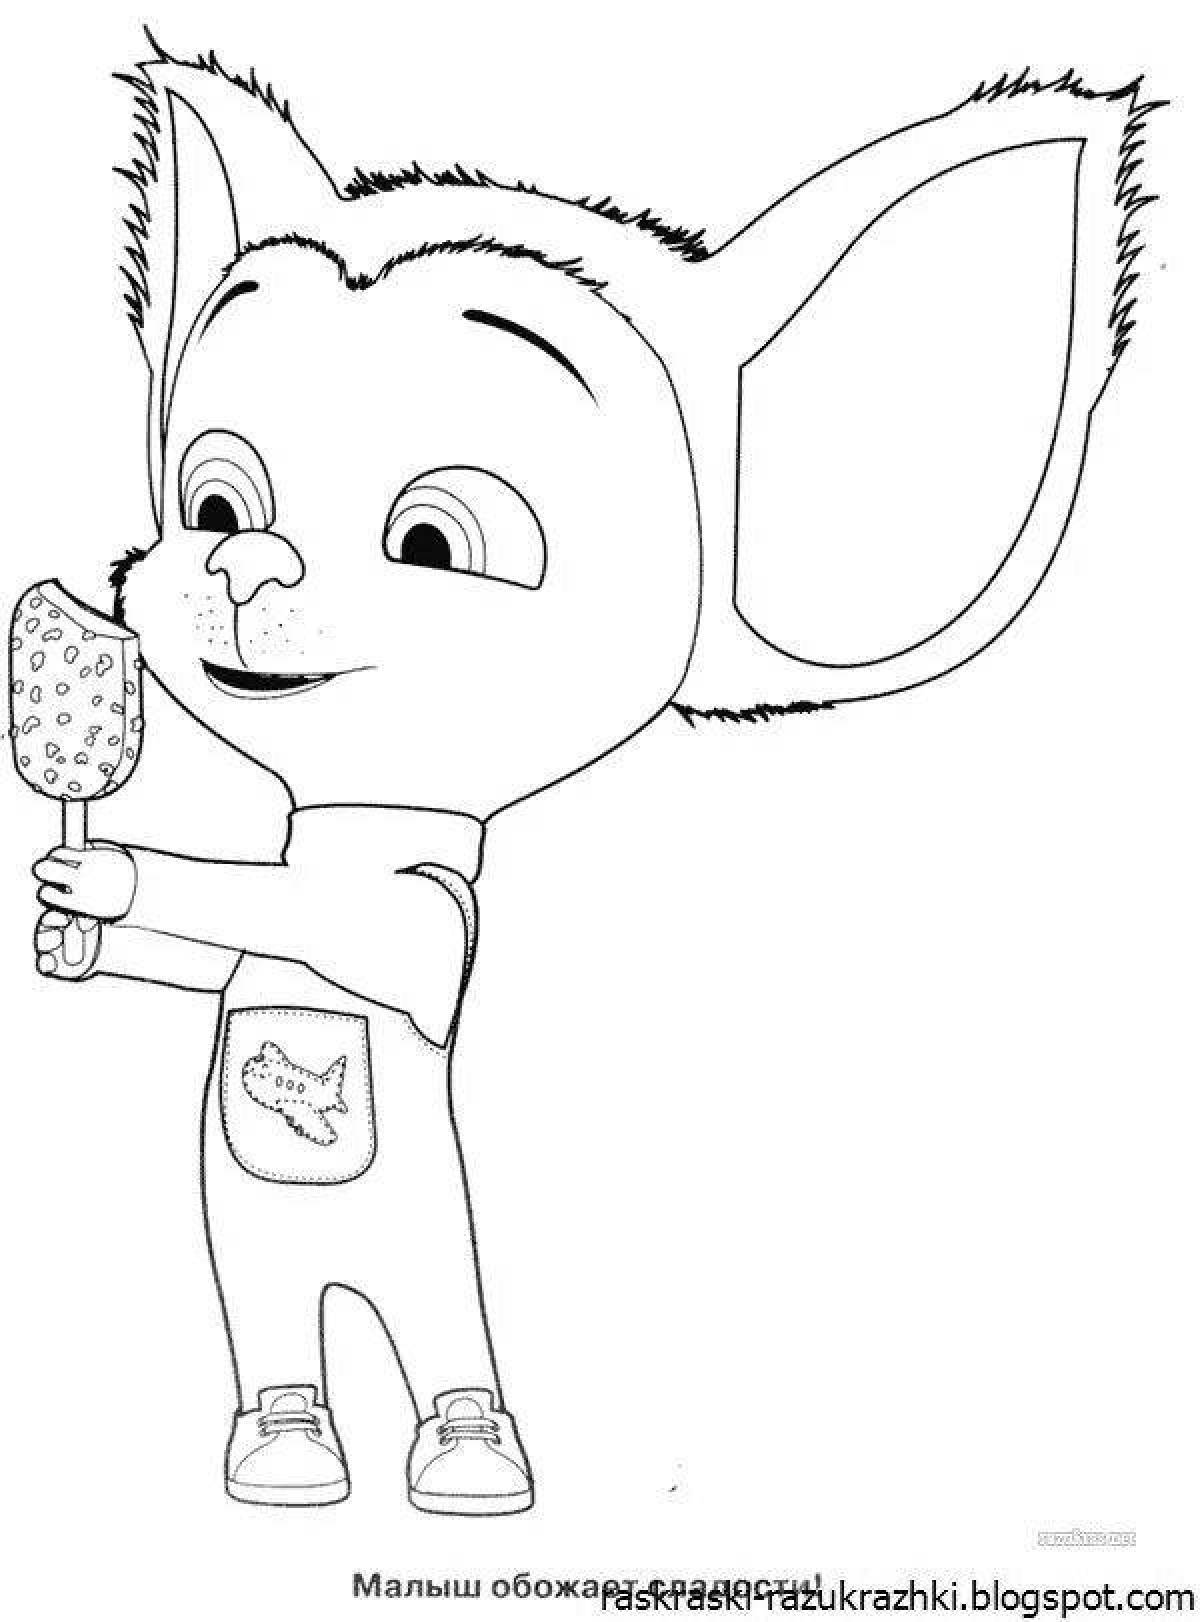 Delightful barboskin coloring pages for children 5-6 years old